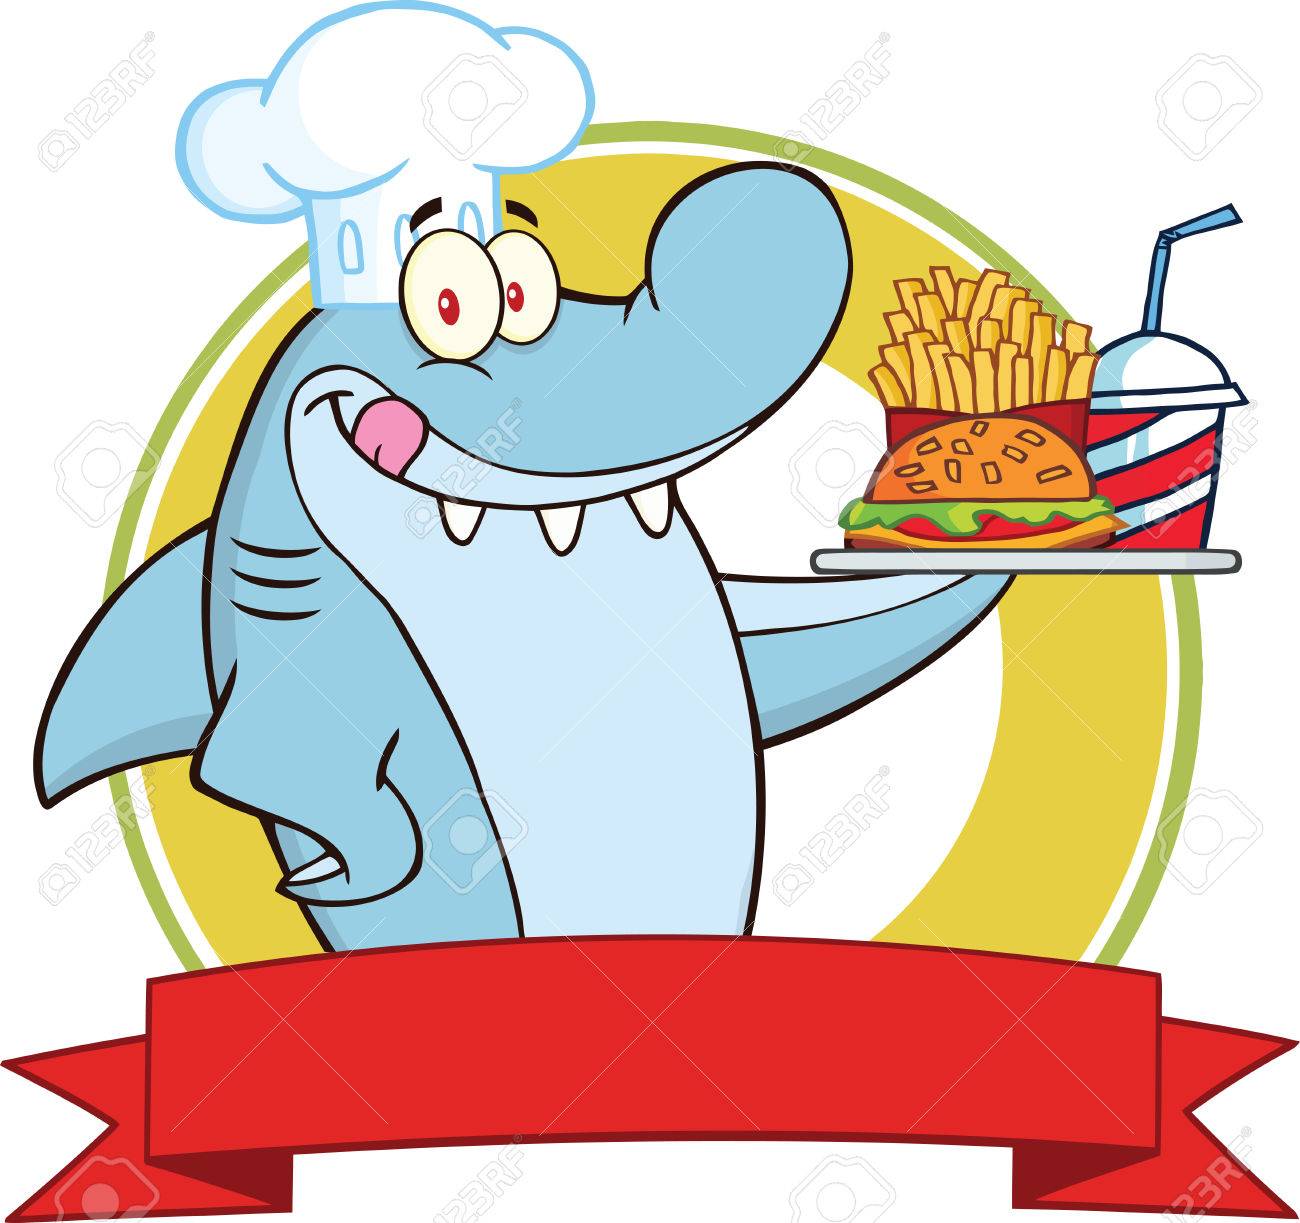 26378822-Chef-Shark-With-Plate-Of-Hamburger-French-Fries-And-Soda-Label-Illustration-Isolated-on-white-Stock-Vector.jpg